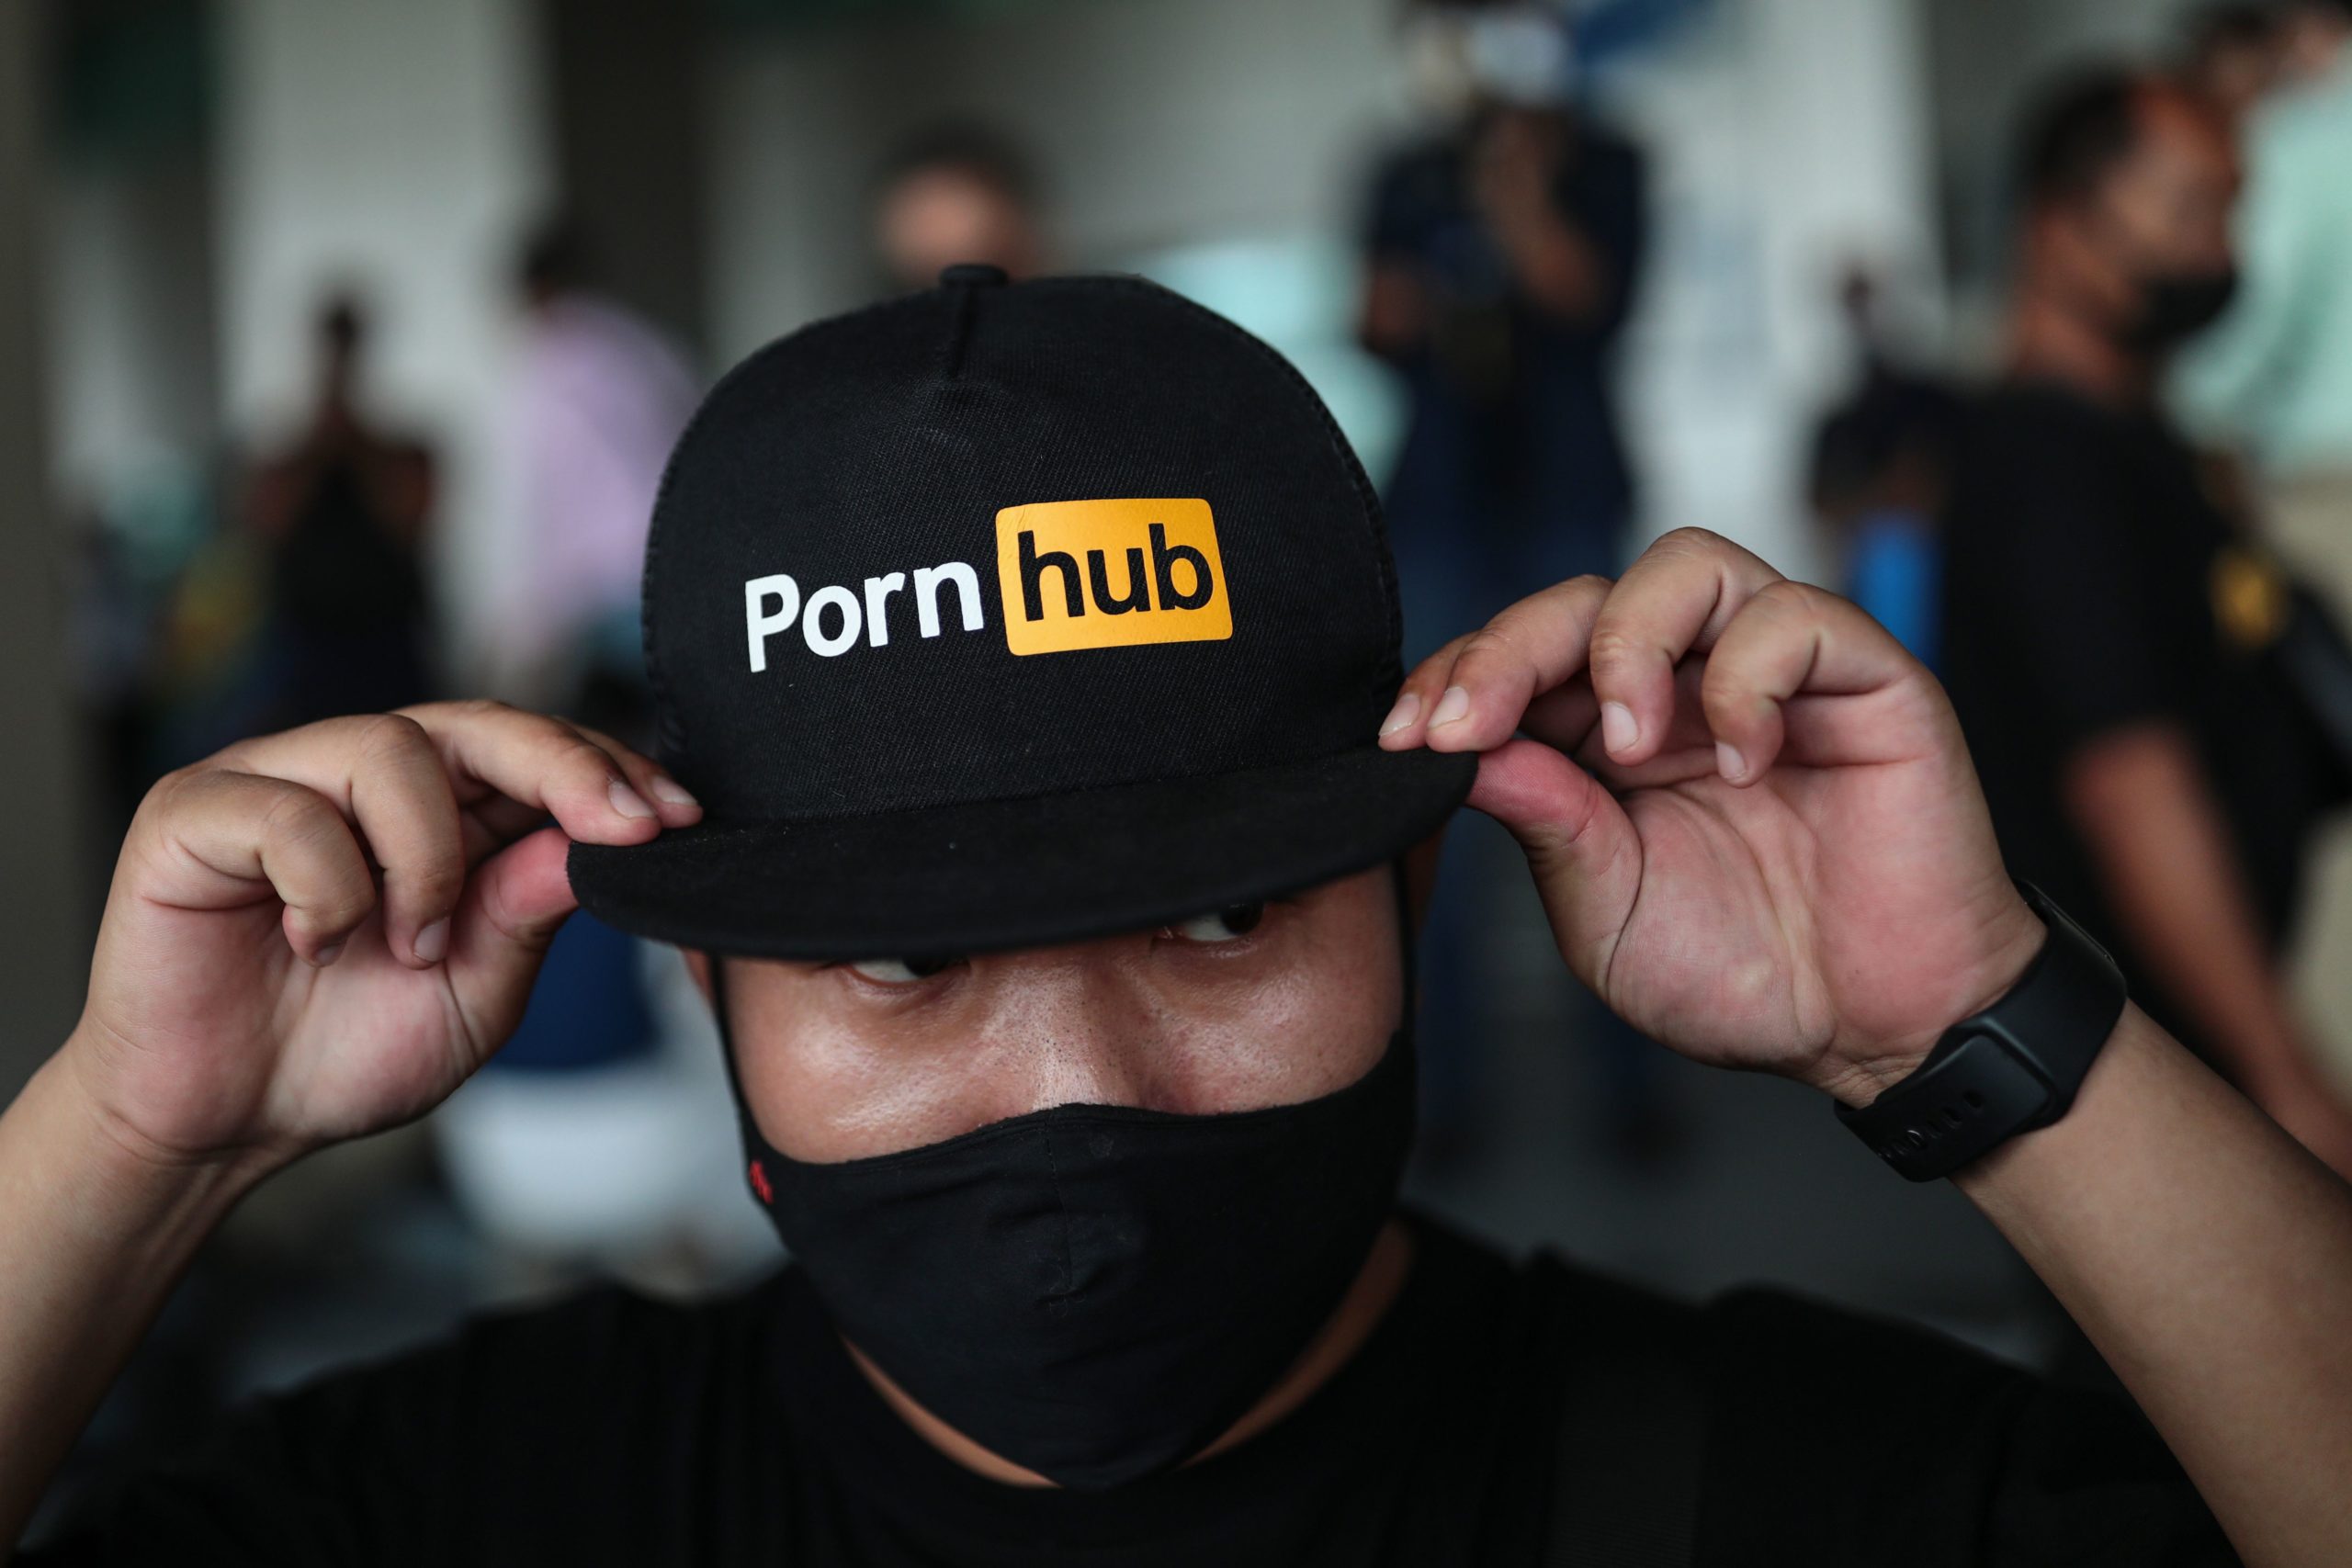 Dozens Of Women Sue Pornhub After It Allegedly Posted Non-Consensual Sex Videos The Daily Caller picture